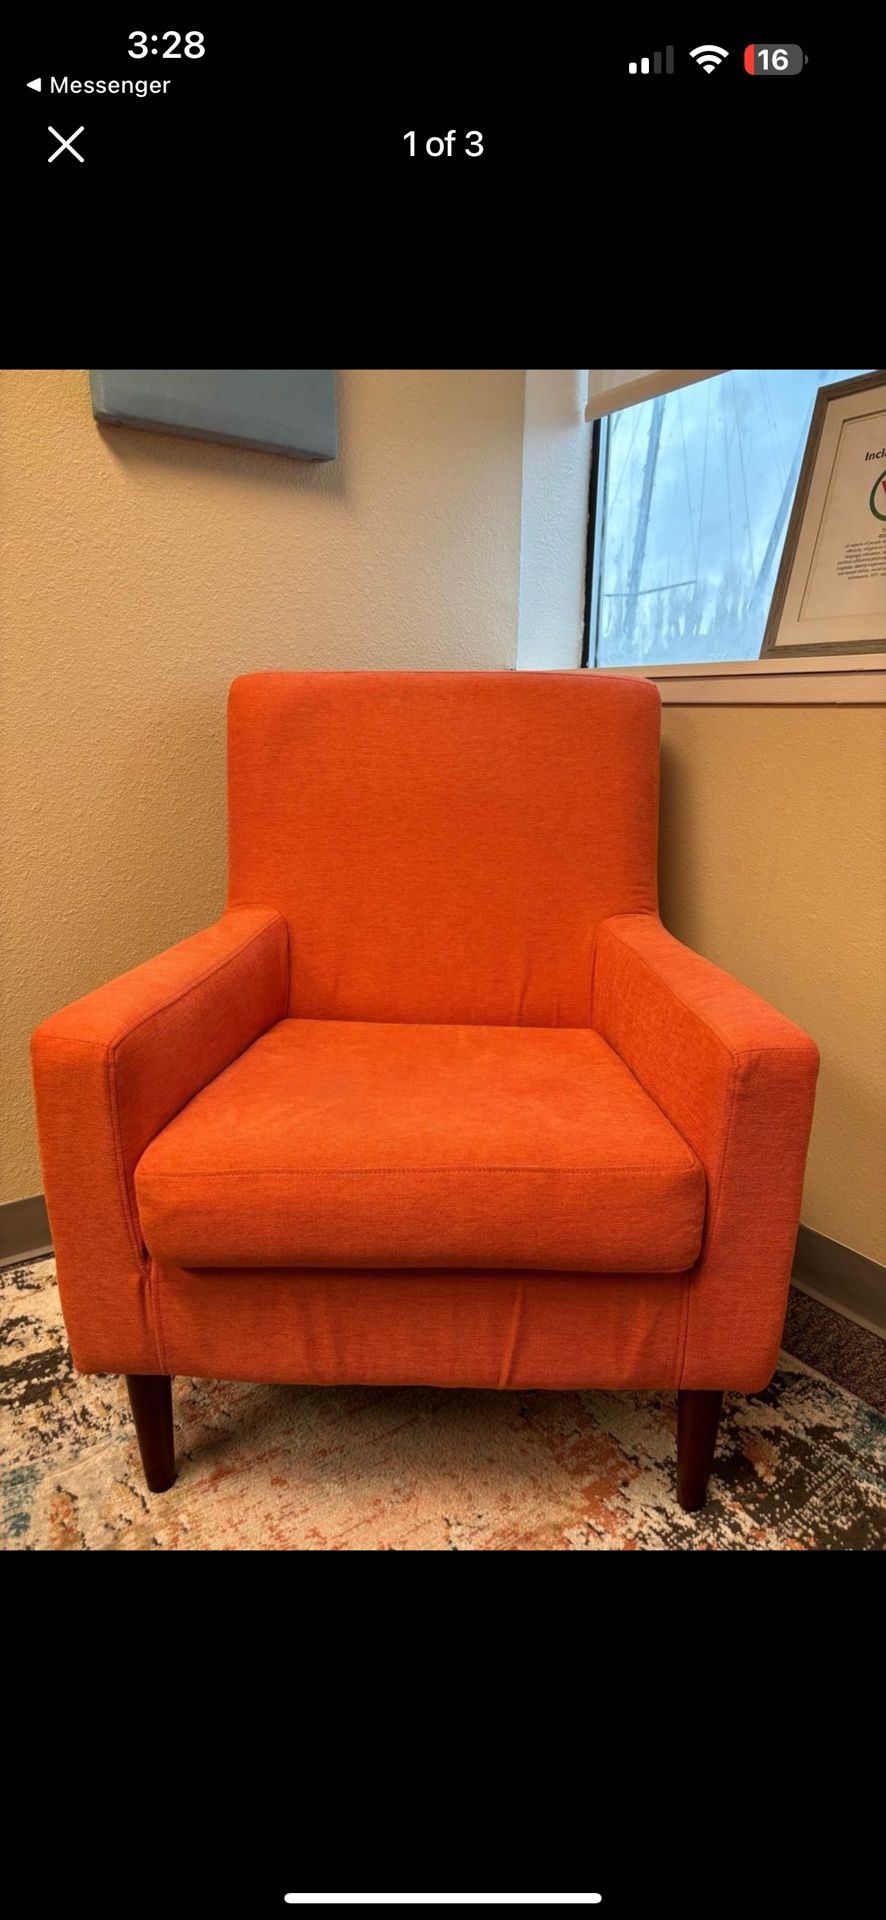 Armchair 1 For $60 Or Pair For $100